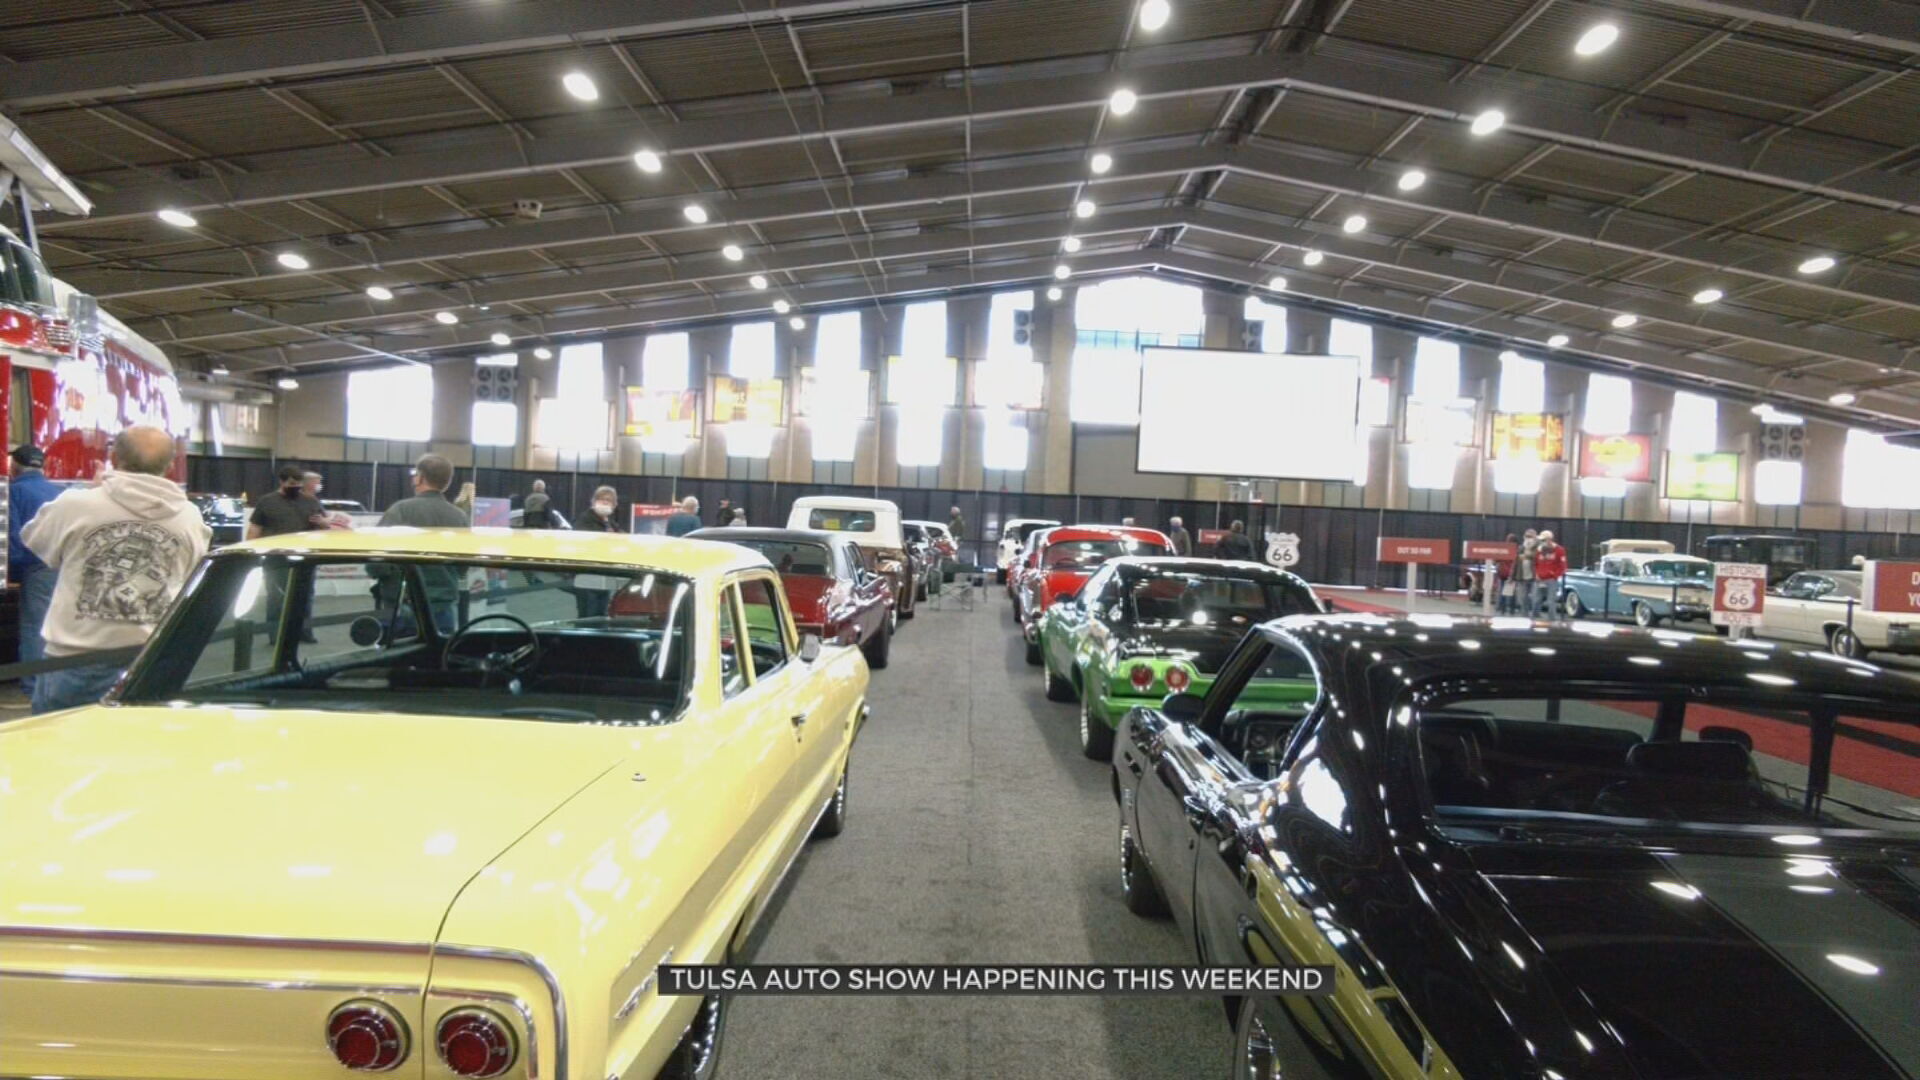 Tulsa Auto Show Returns With Classic & Brand-New Cars On Display